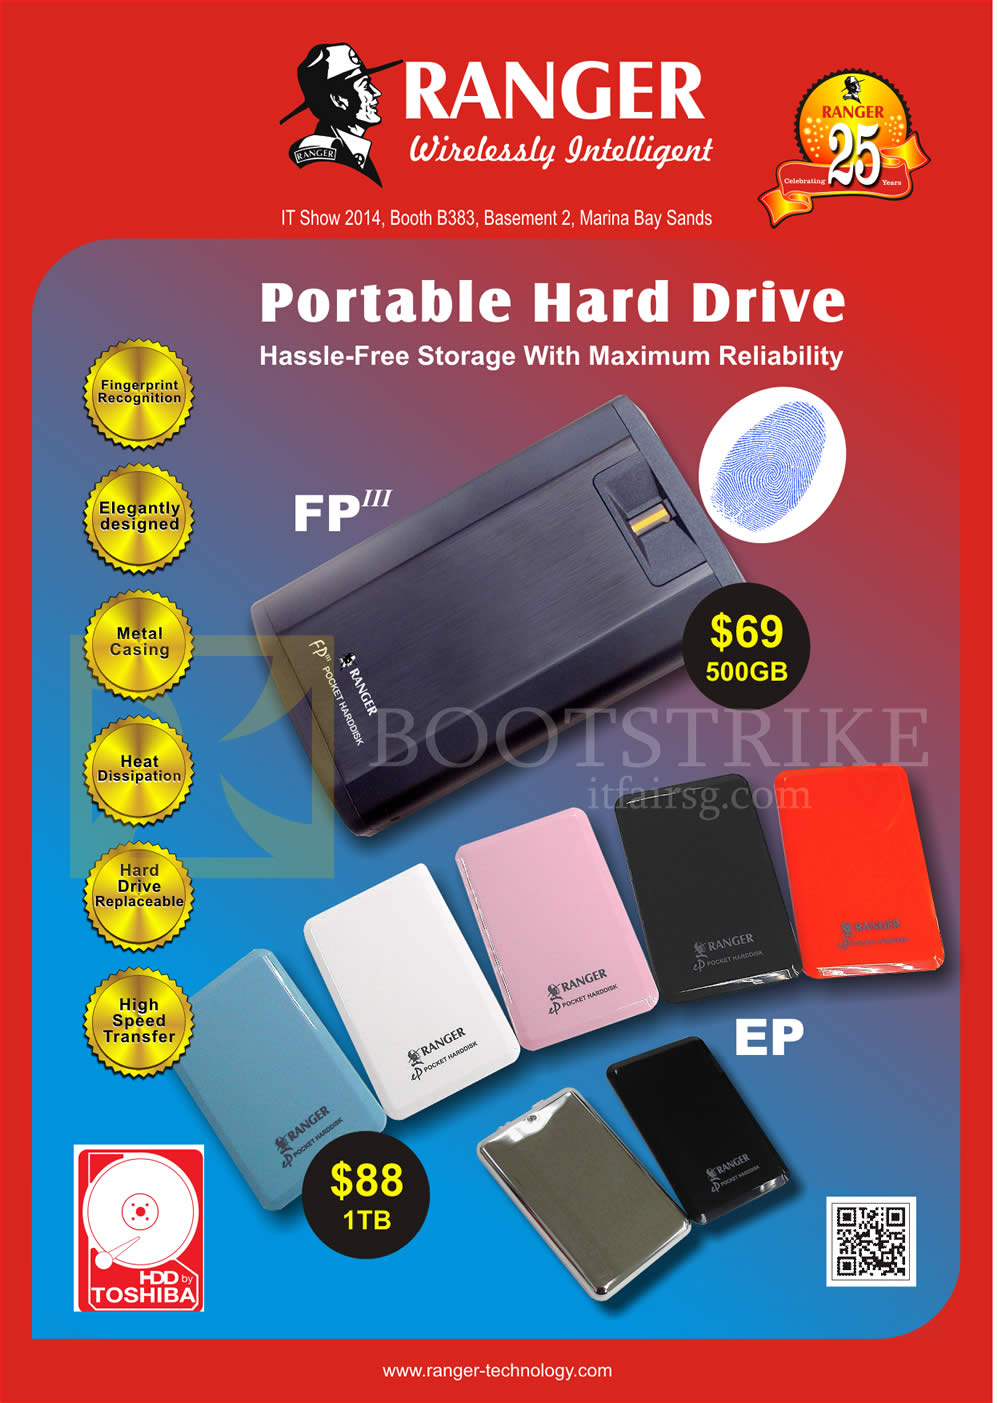 IT SHOW 2014 price list image brochure of Systems Tech Ranger External Storage Drive FP 500GB, EP 1TB, Toshiba HDD